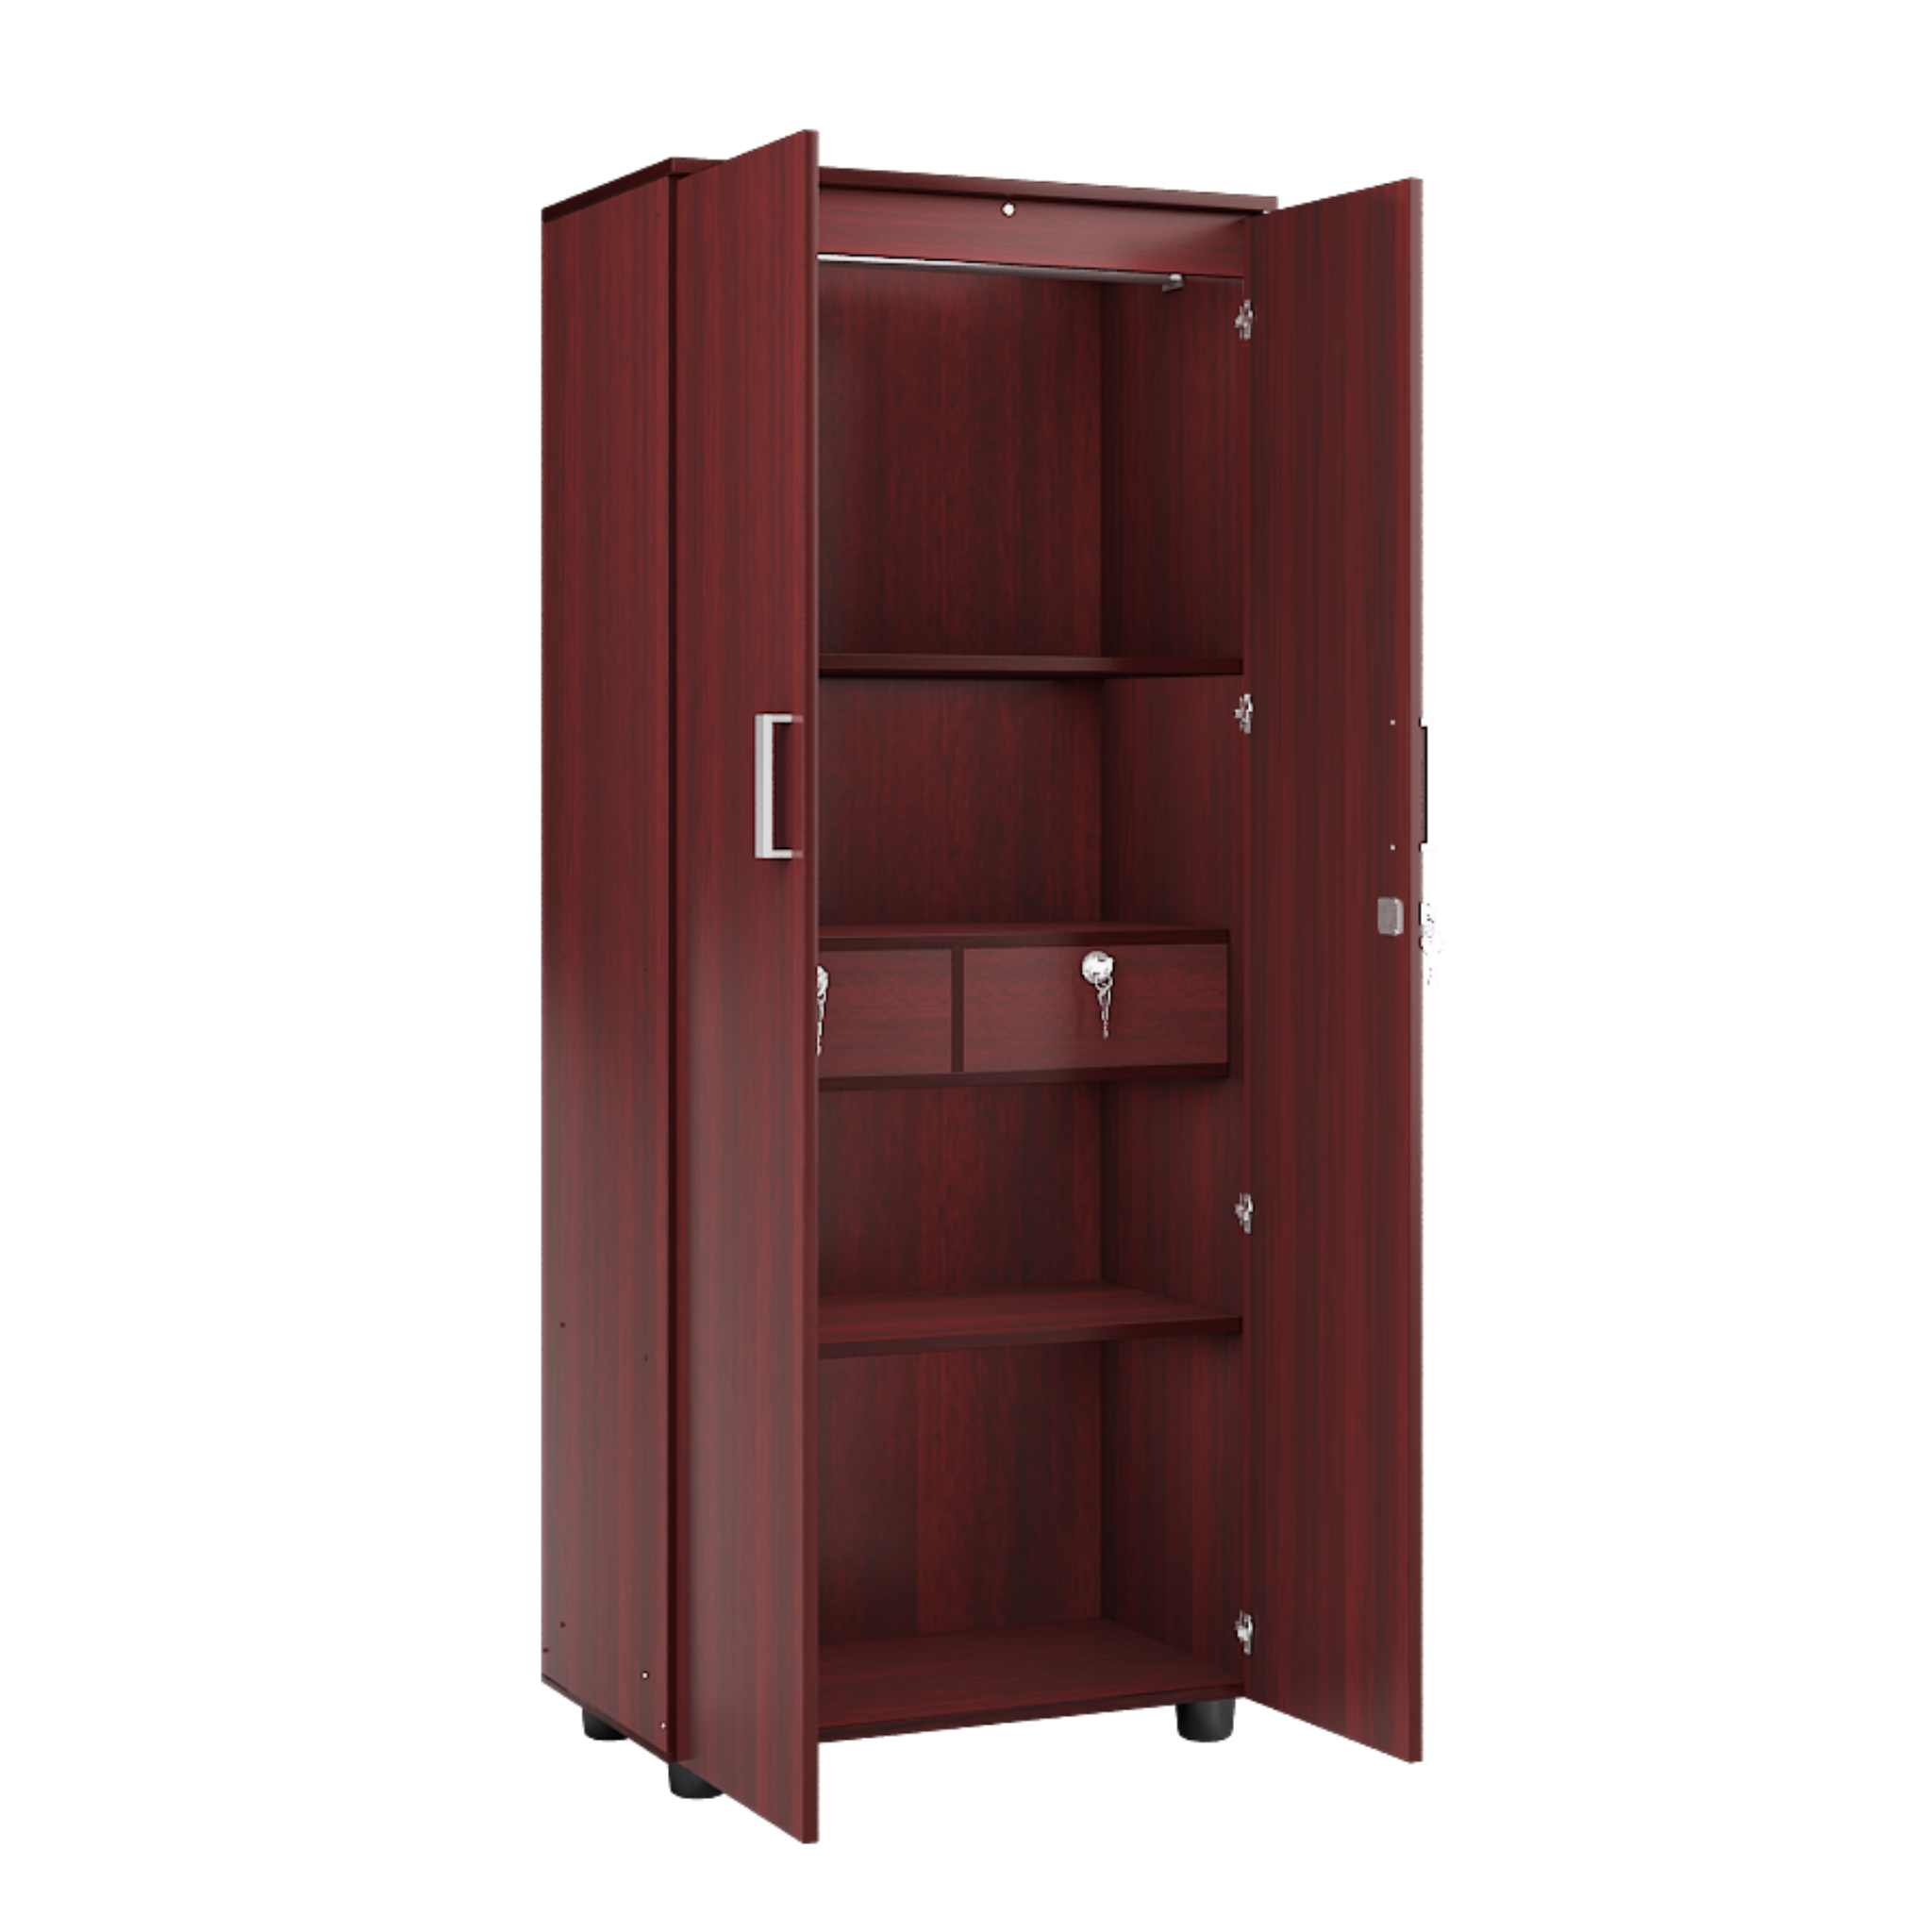 Super and Luxury Two Door Wardrobe with Dual Drawer